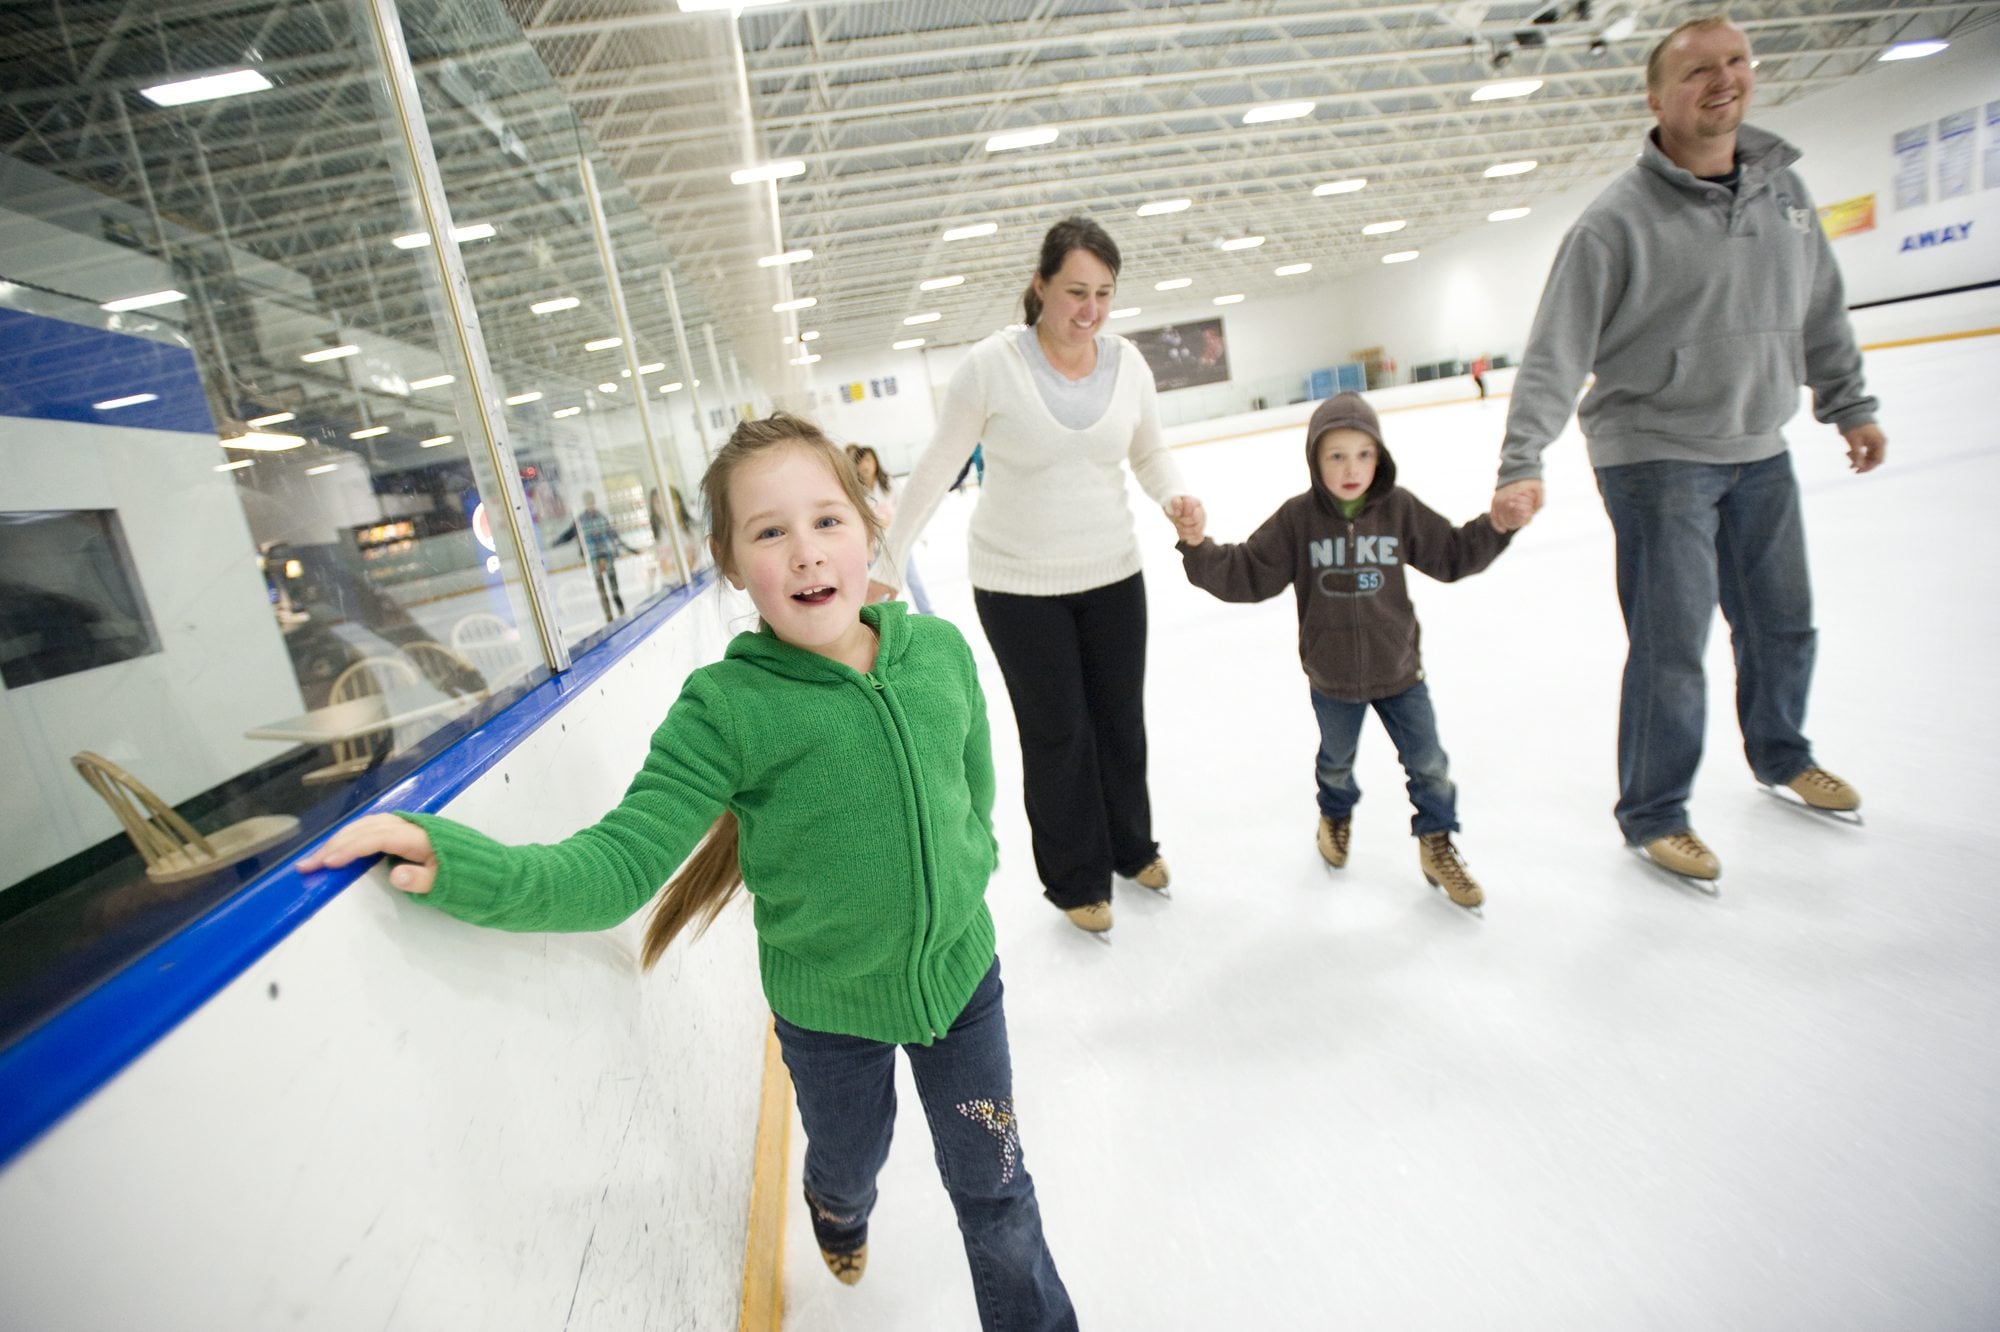 The Yamov family, from left, Christina, 7, Yuliya, Max, 5, and Nick skate at the Mountain View Ice Arena. About 2.9 percent of Clark County residents were born in Eastern Europe.